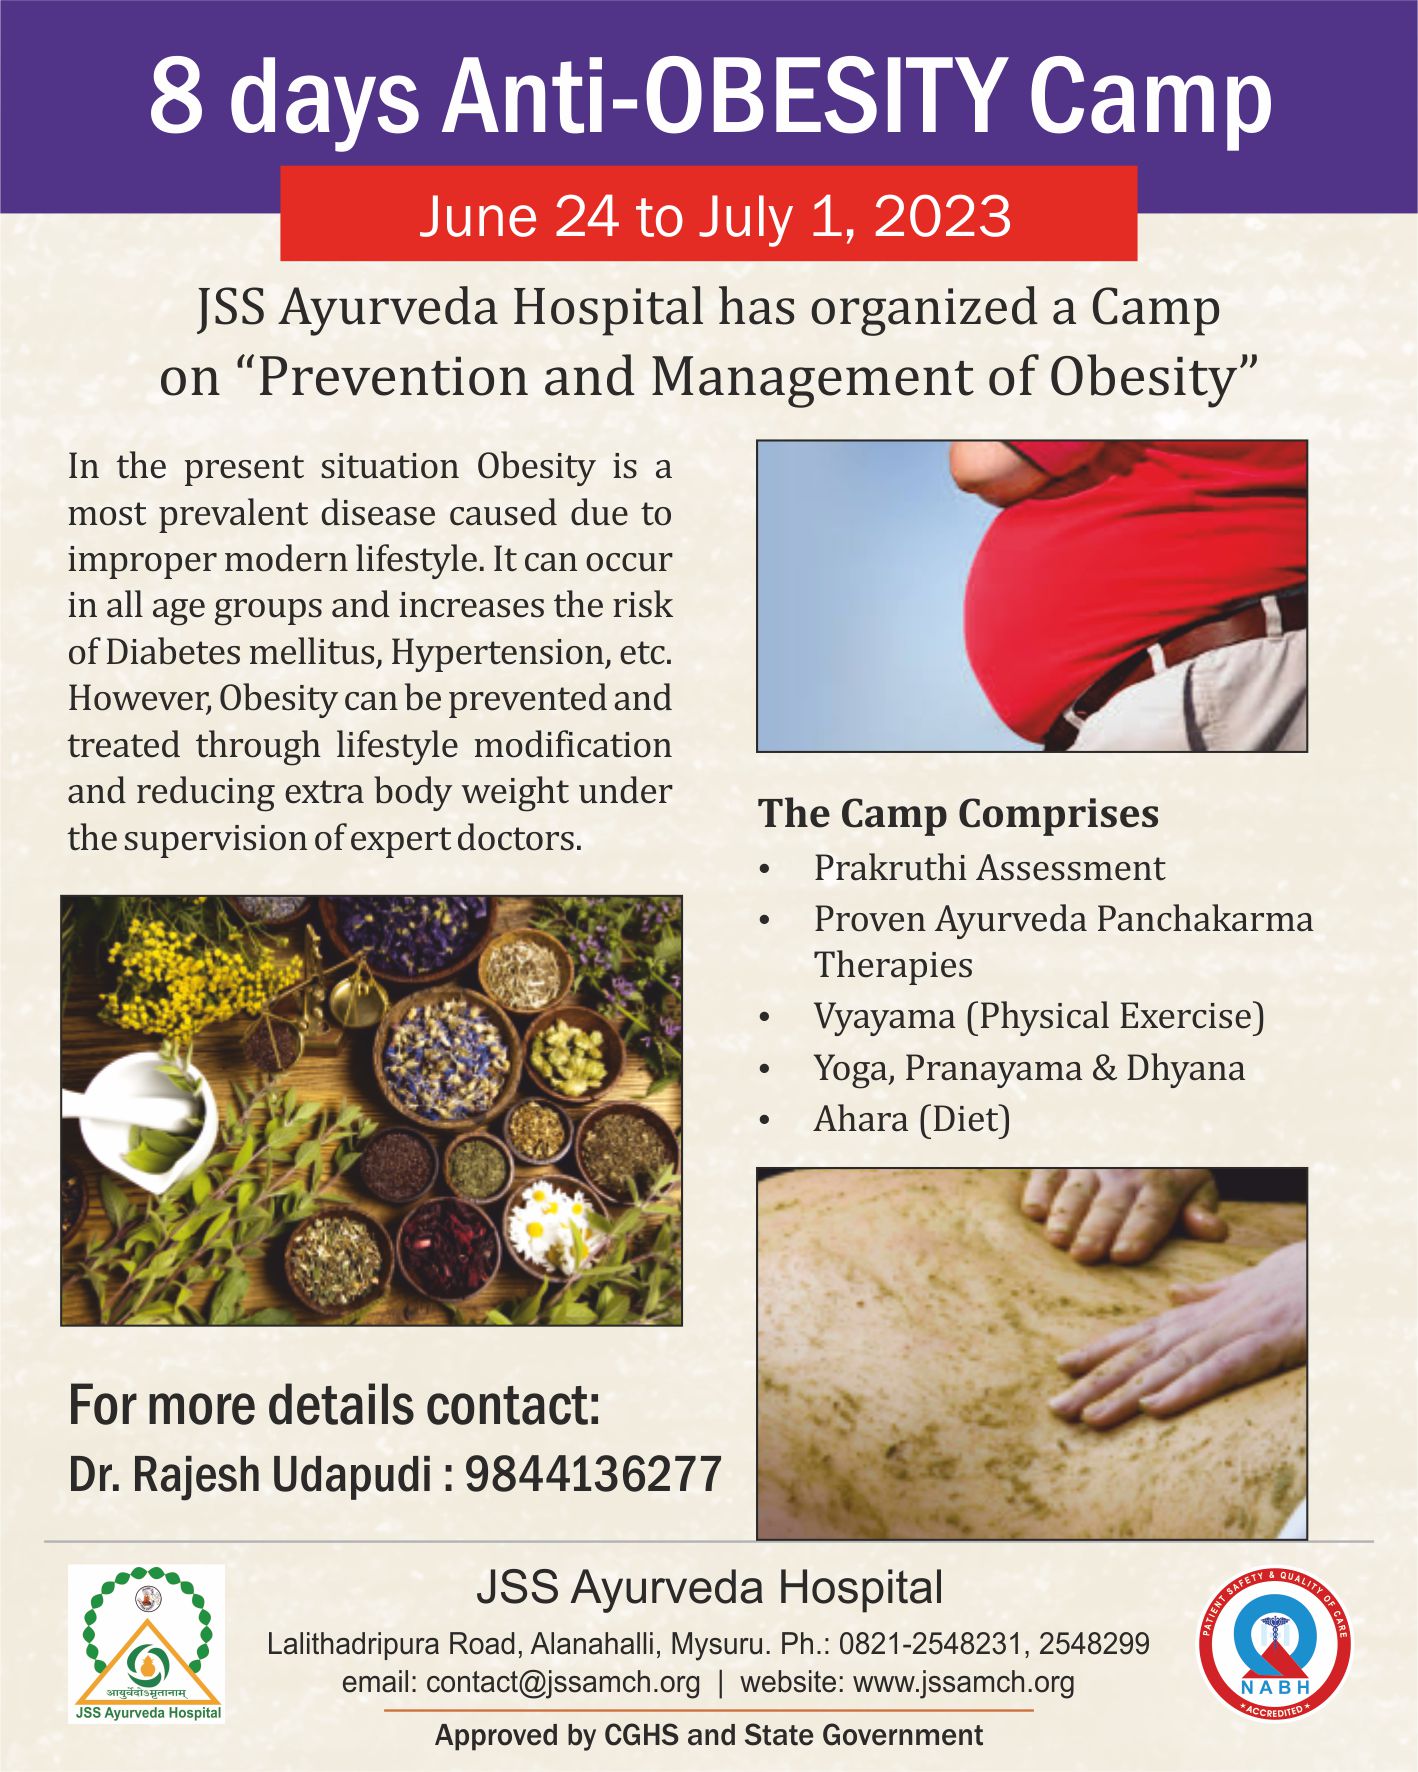 JSS Ayurveda Hospital has organized 8-days Camp on “Prevention and Management of Obesity” From June 24 to July 01, 2023